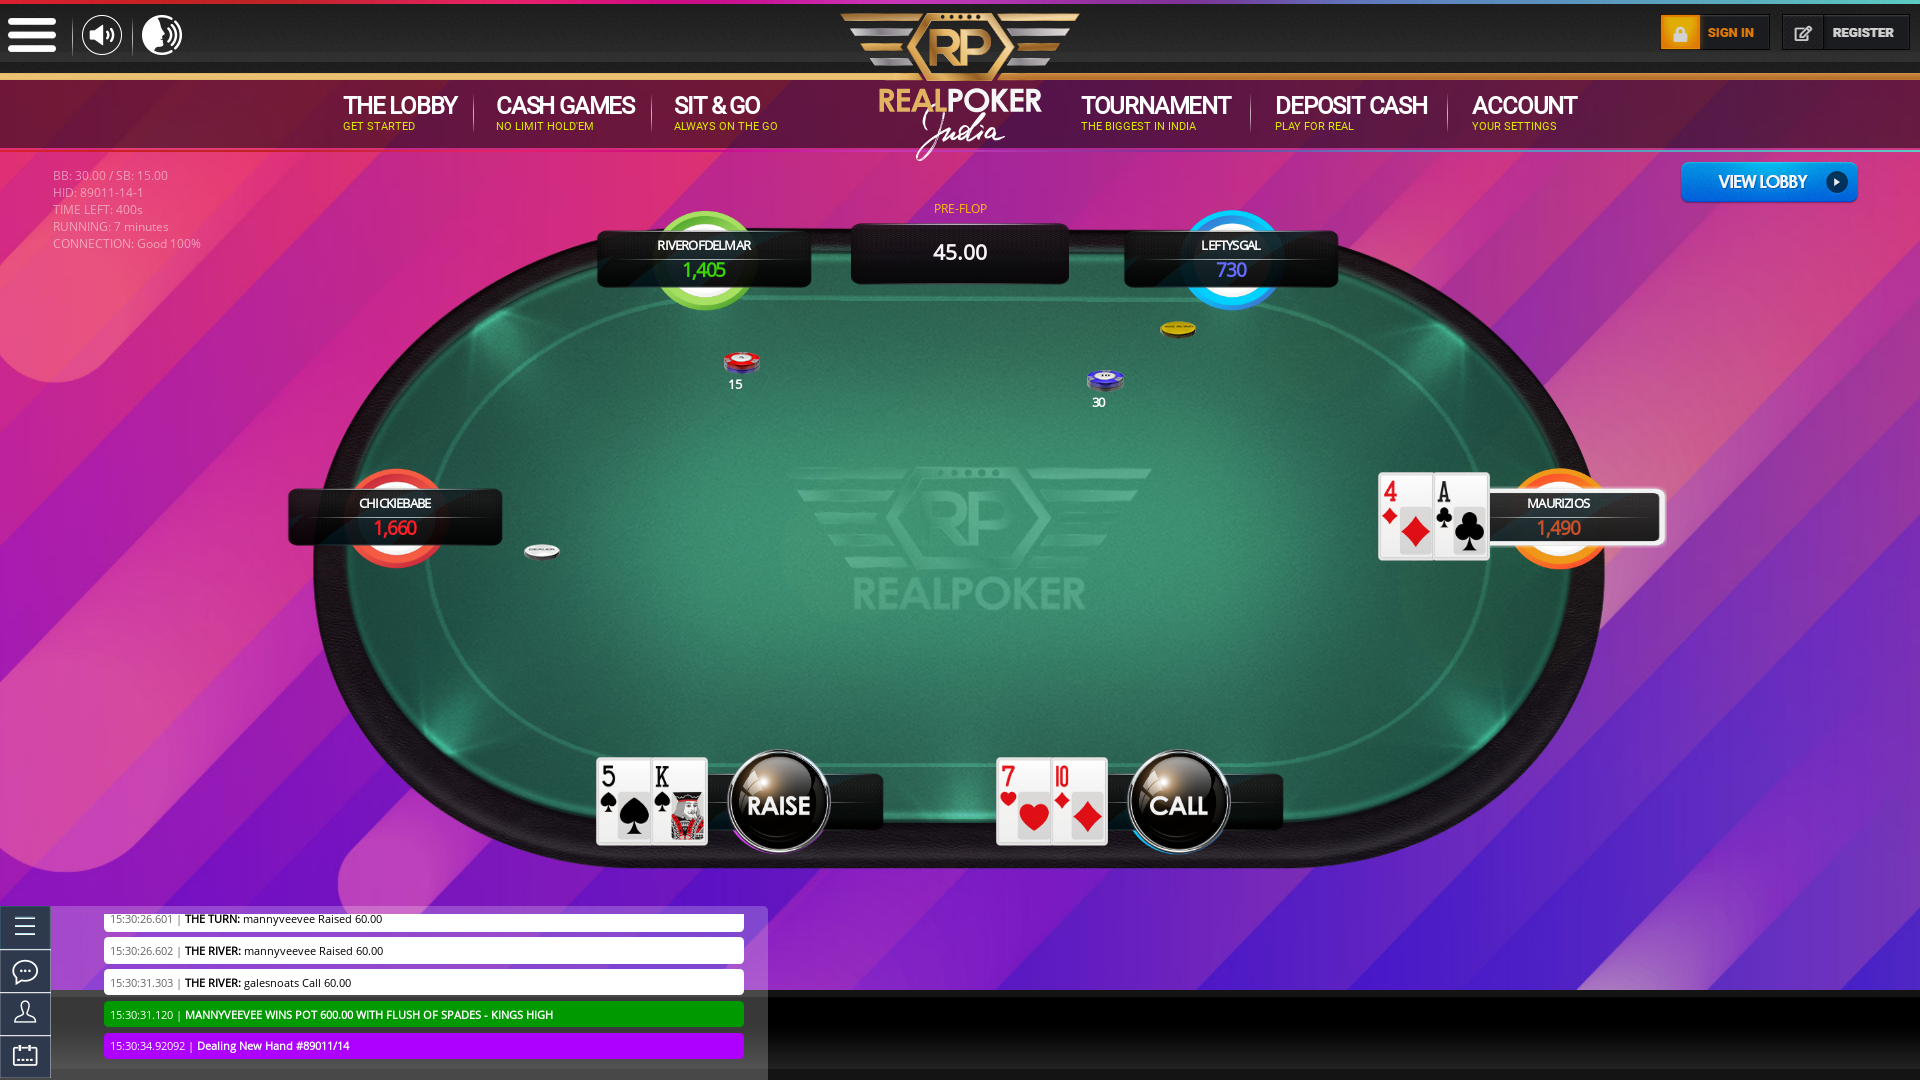 Texas Holdem Online Poker Room on the 5th July